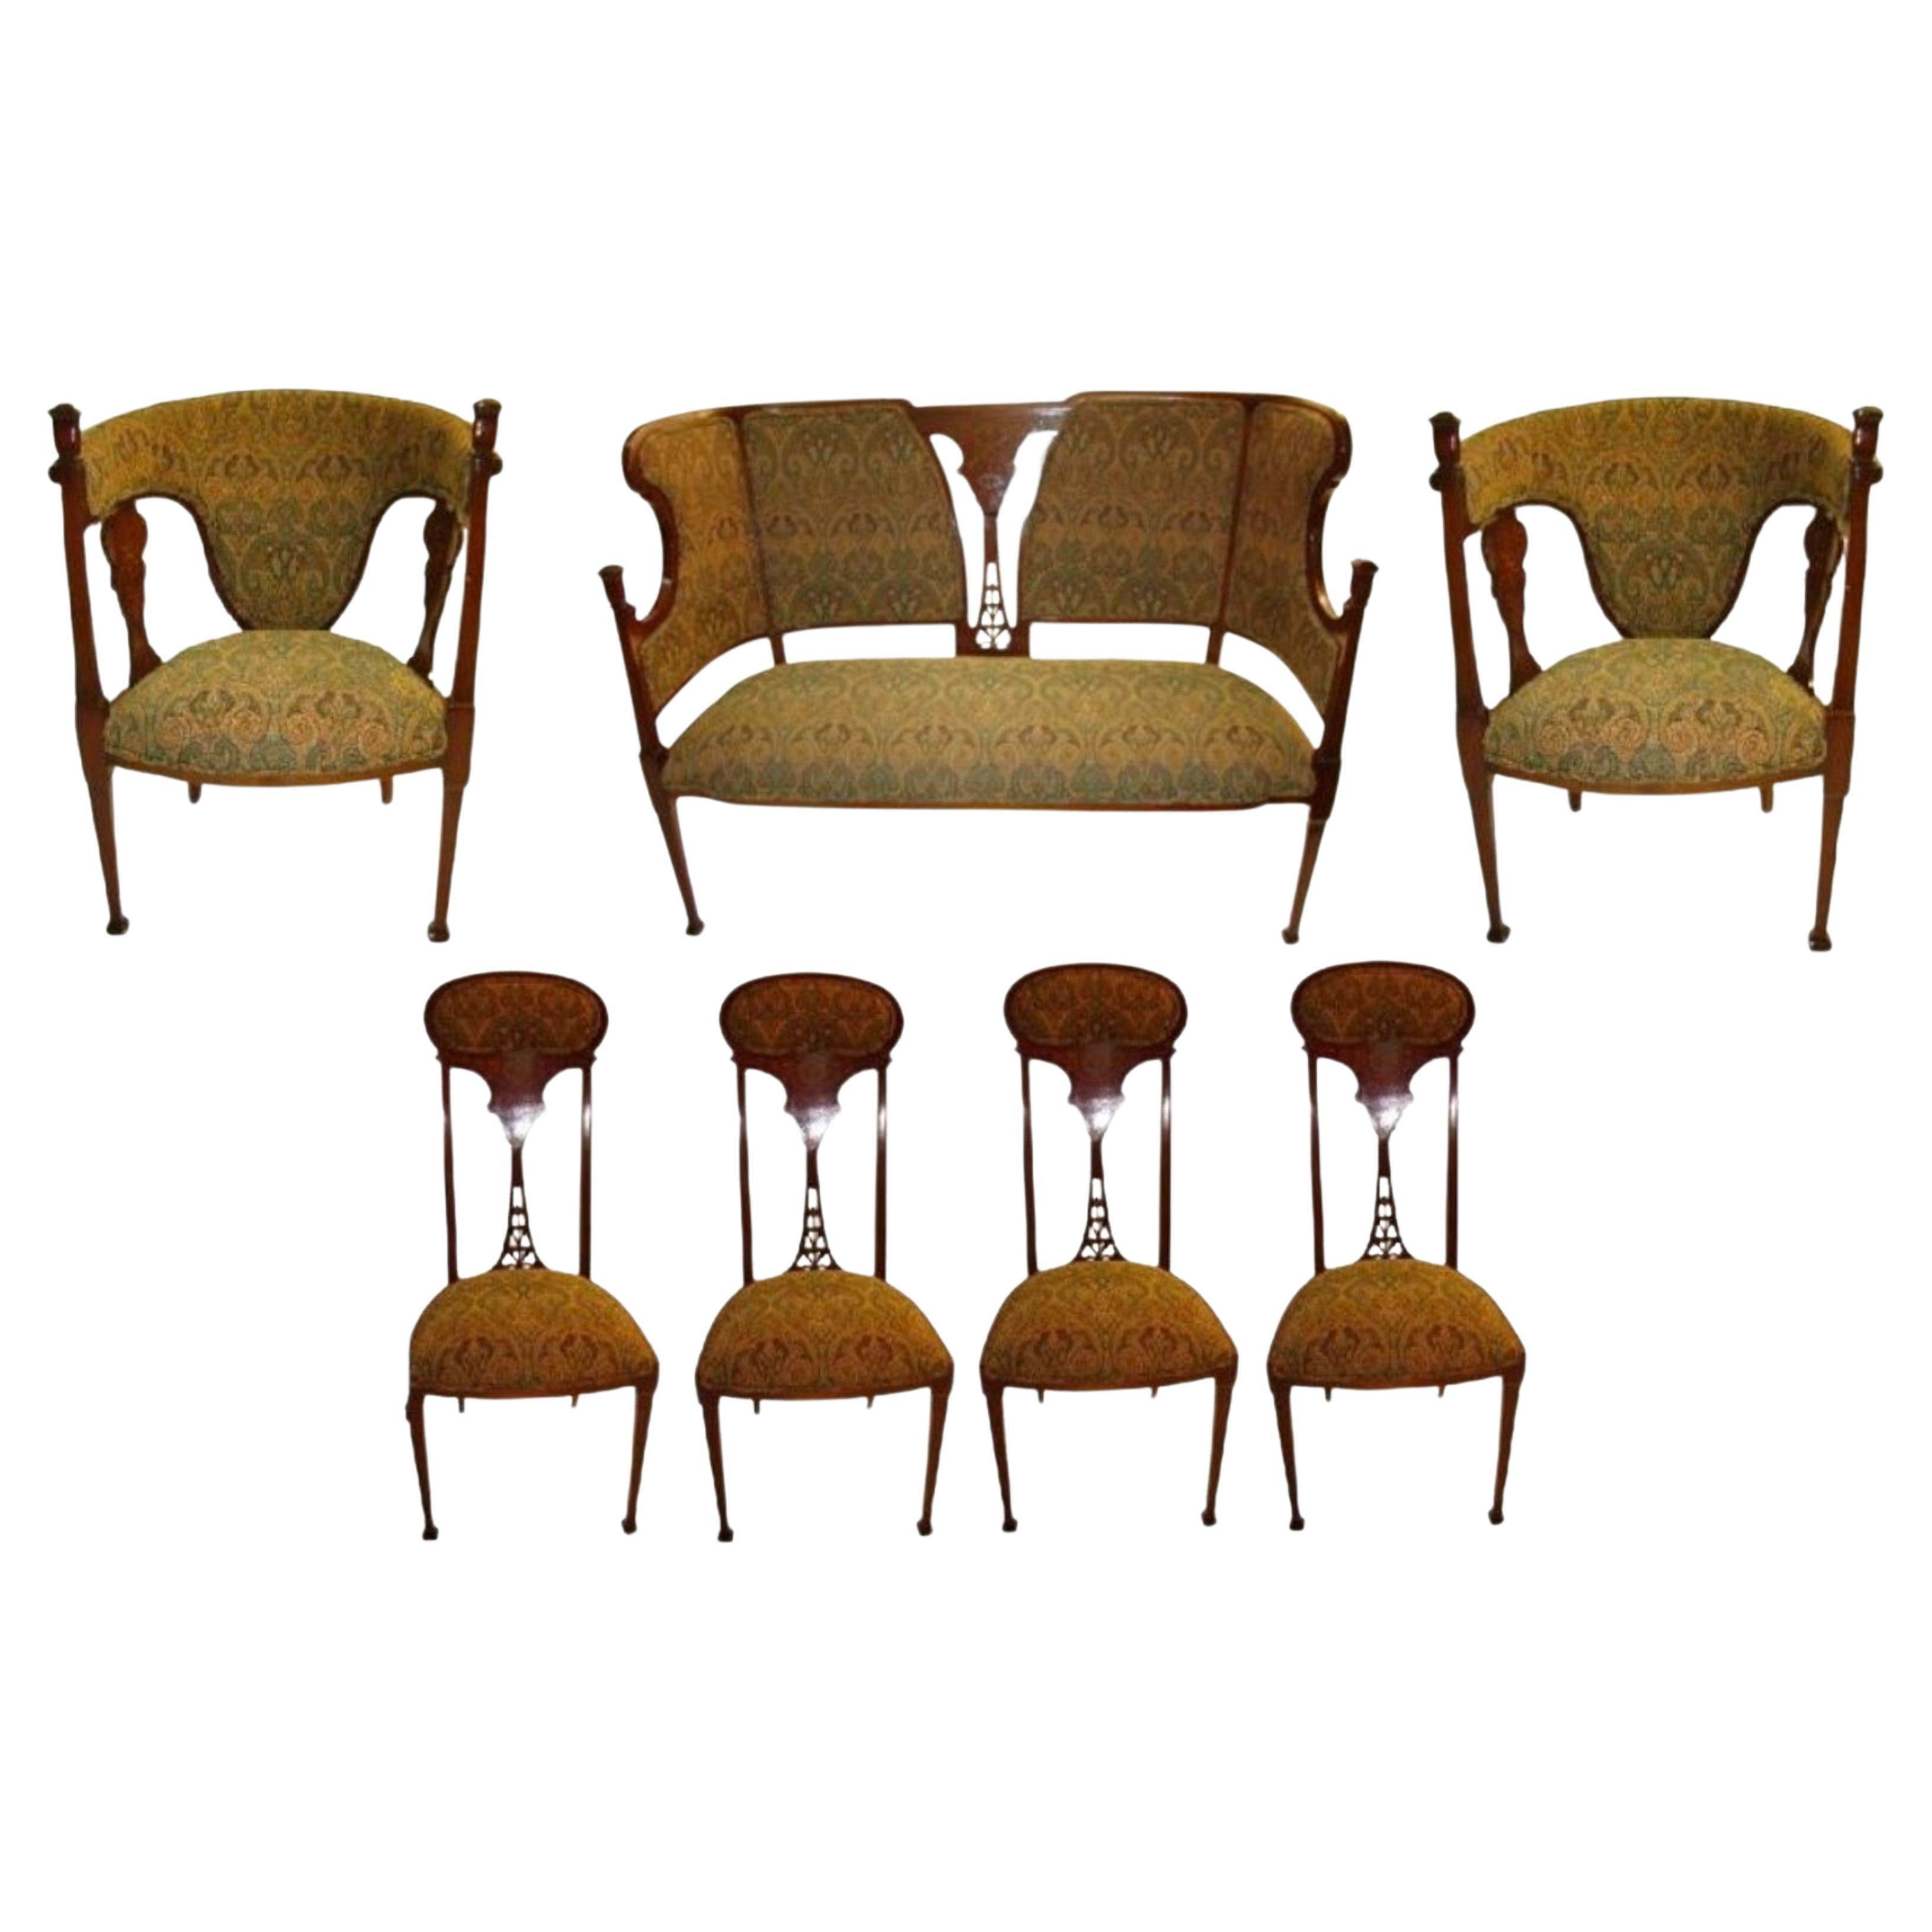 Art Nouveau Set, 1 Sofa, 2 Armchairs, 4 Chairs, 1890, Attributed William Morris For Sale